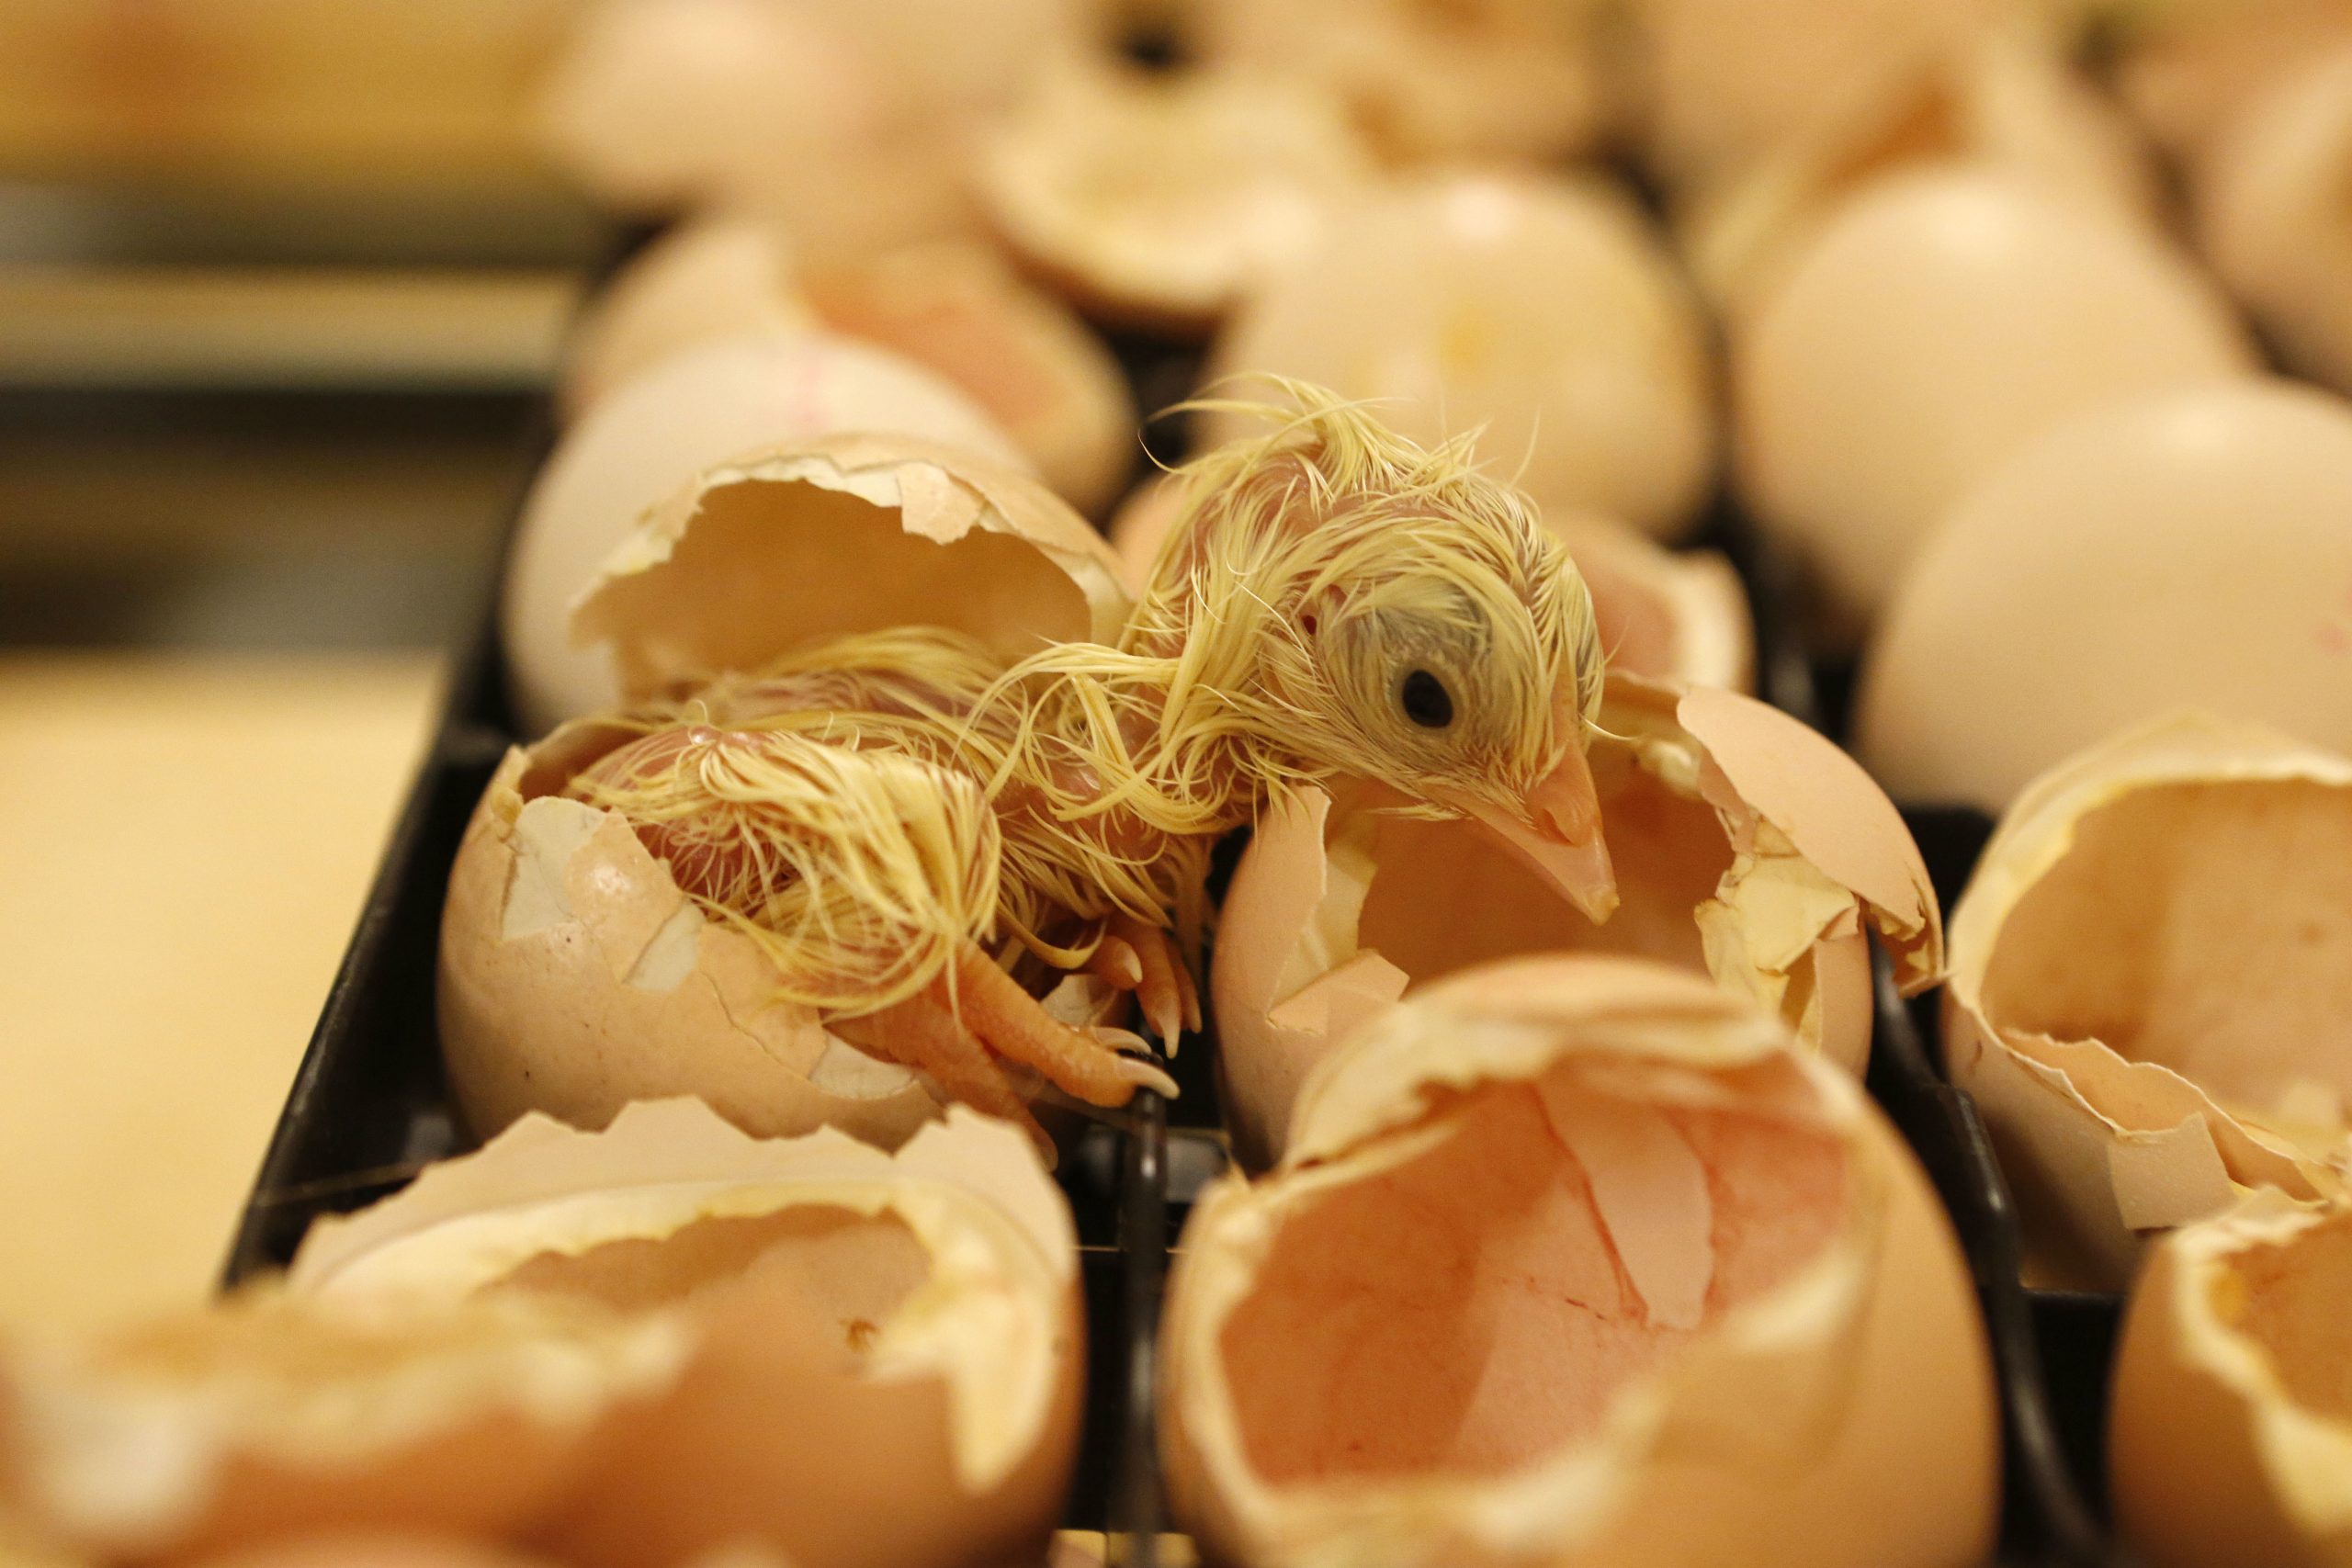 Supplementing poultry diets with hatchery waste